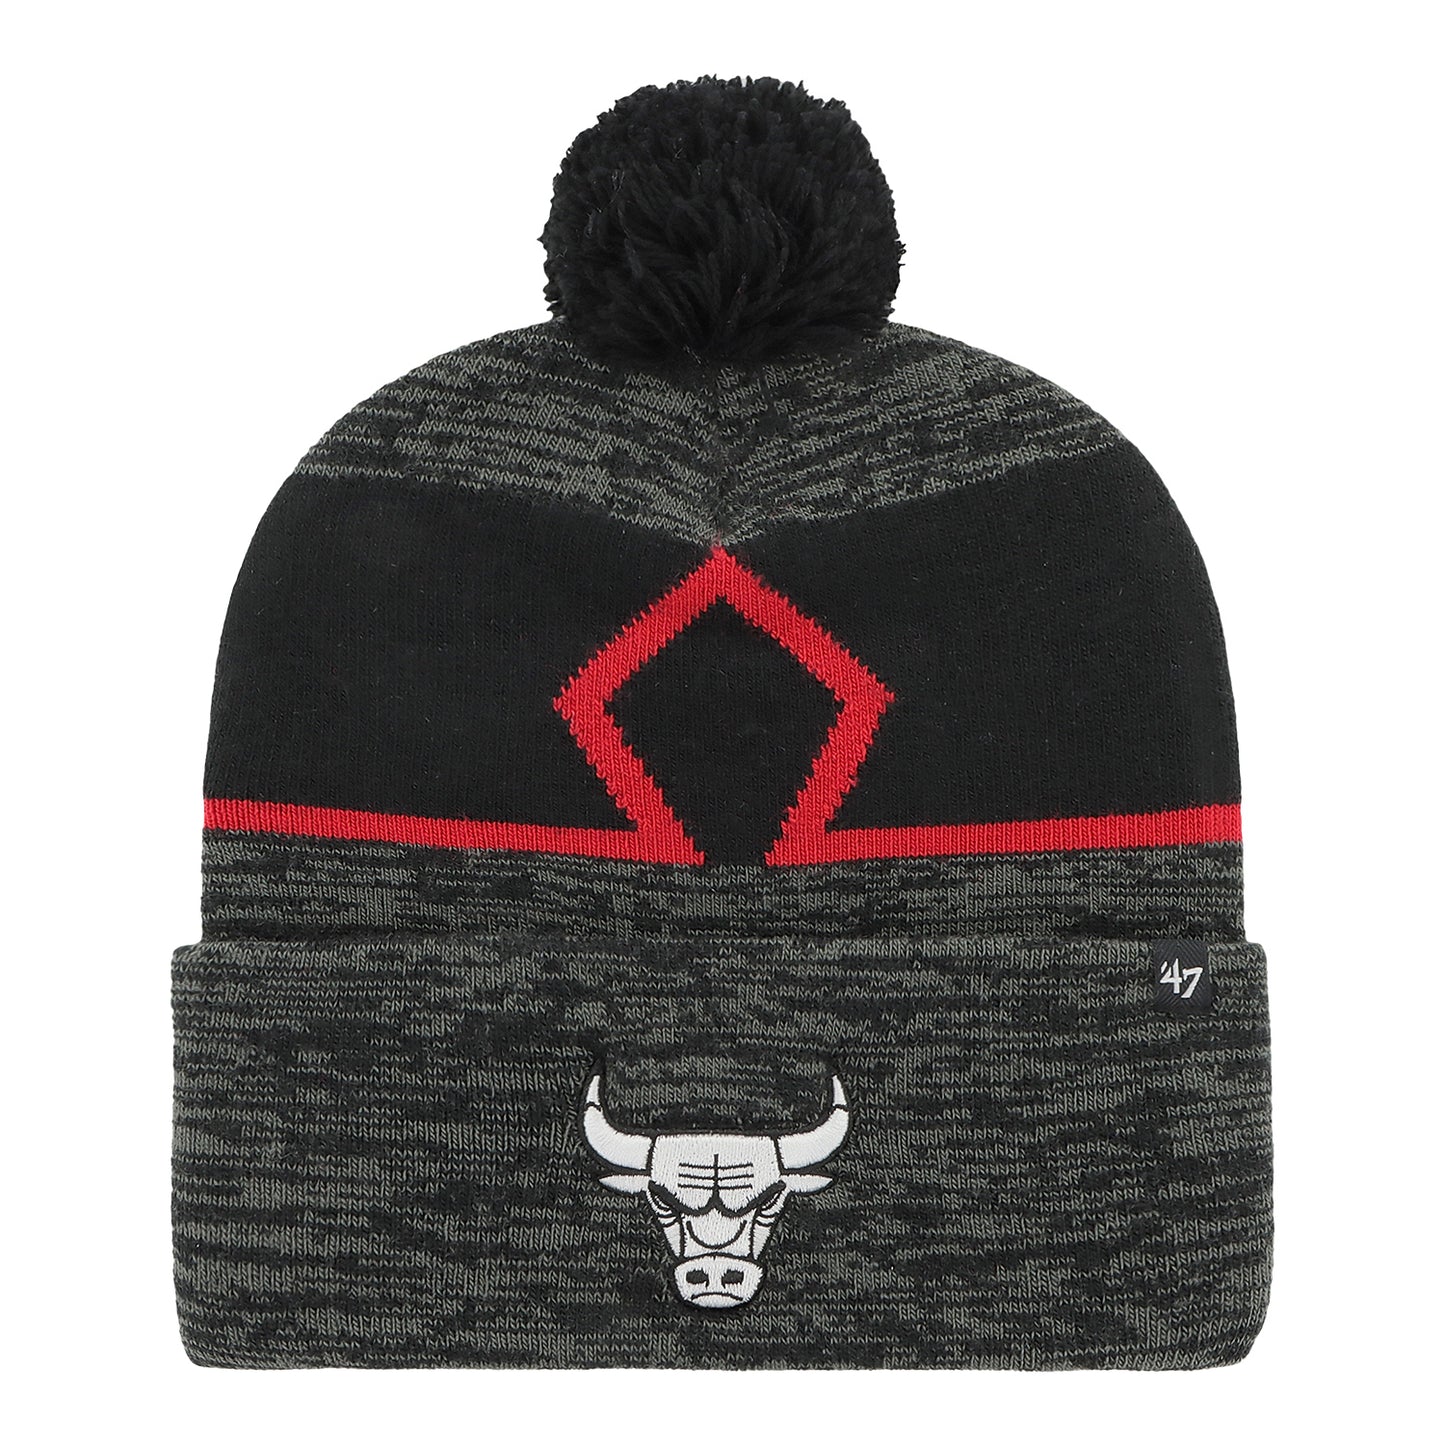 Chicago Bulls City Edition Knit Hat - front view